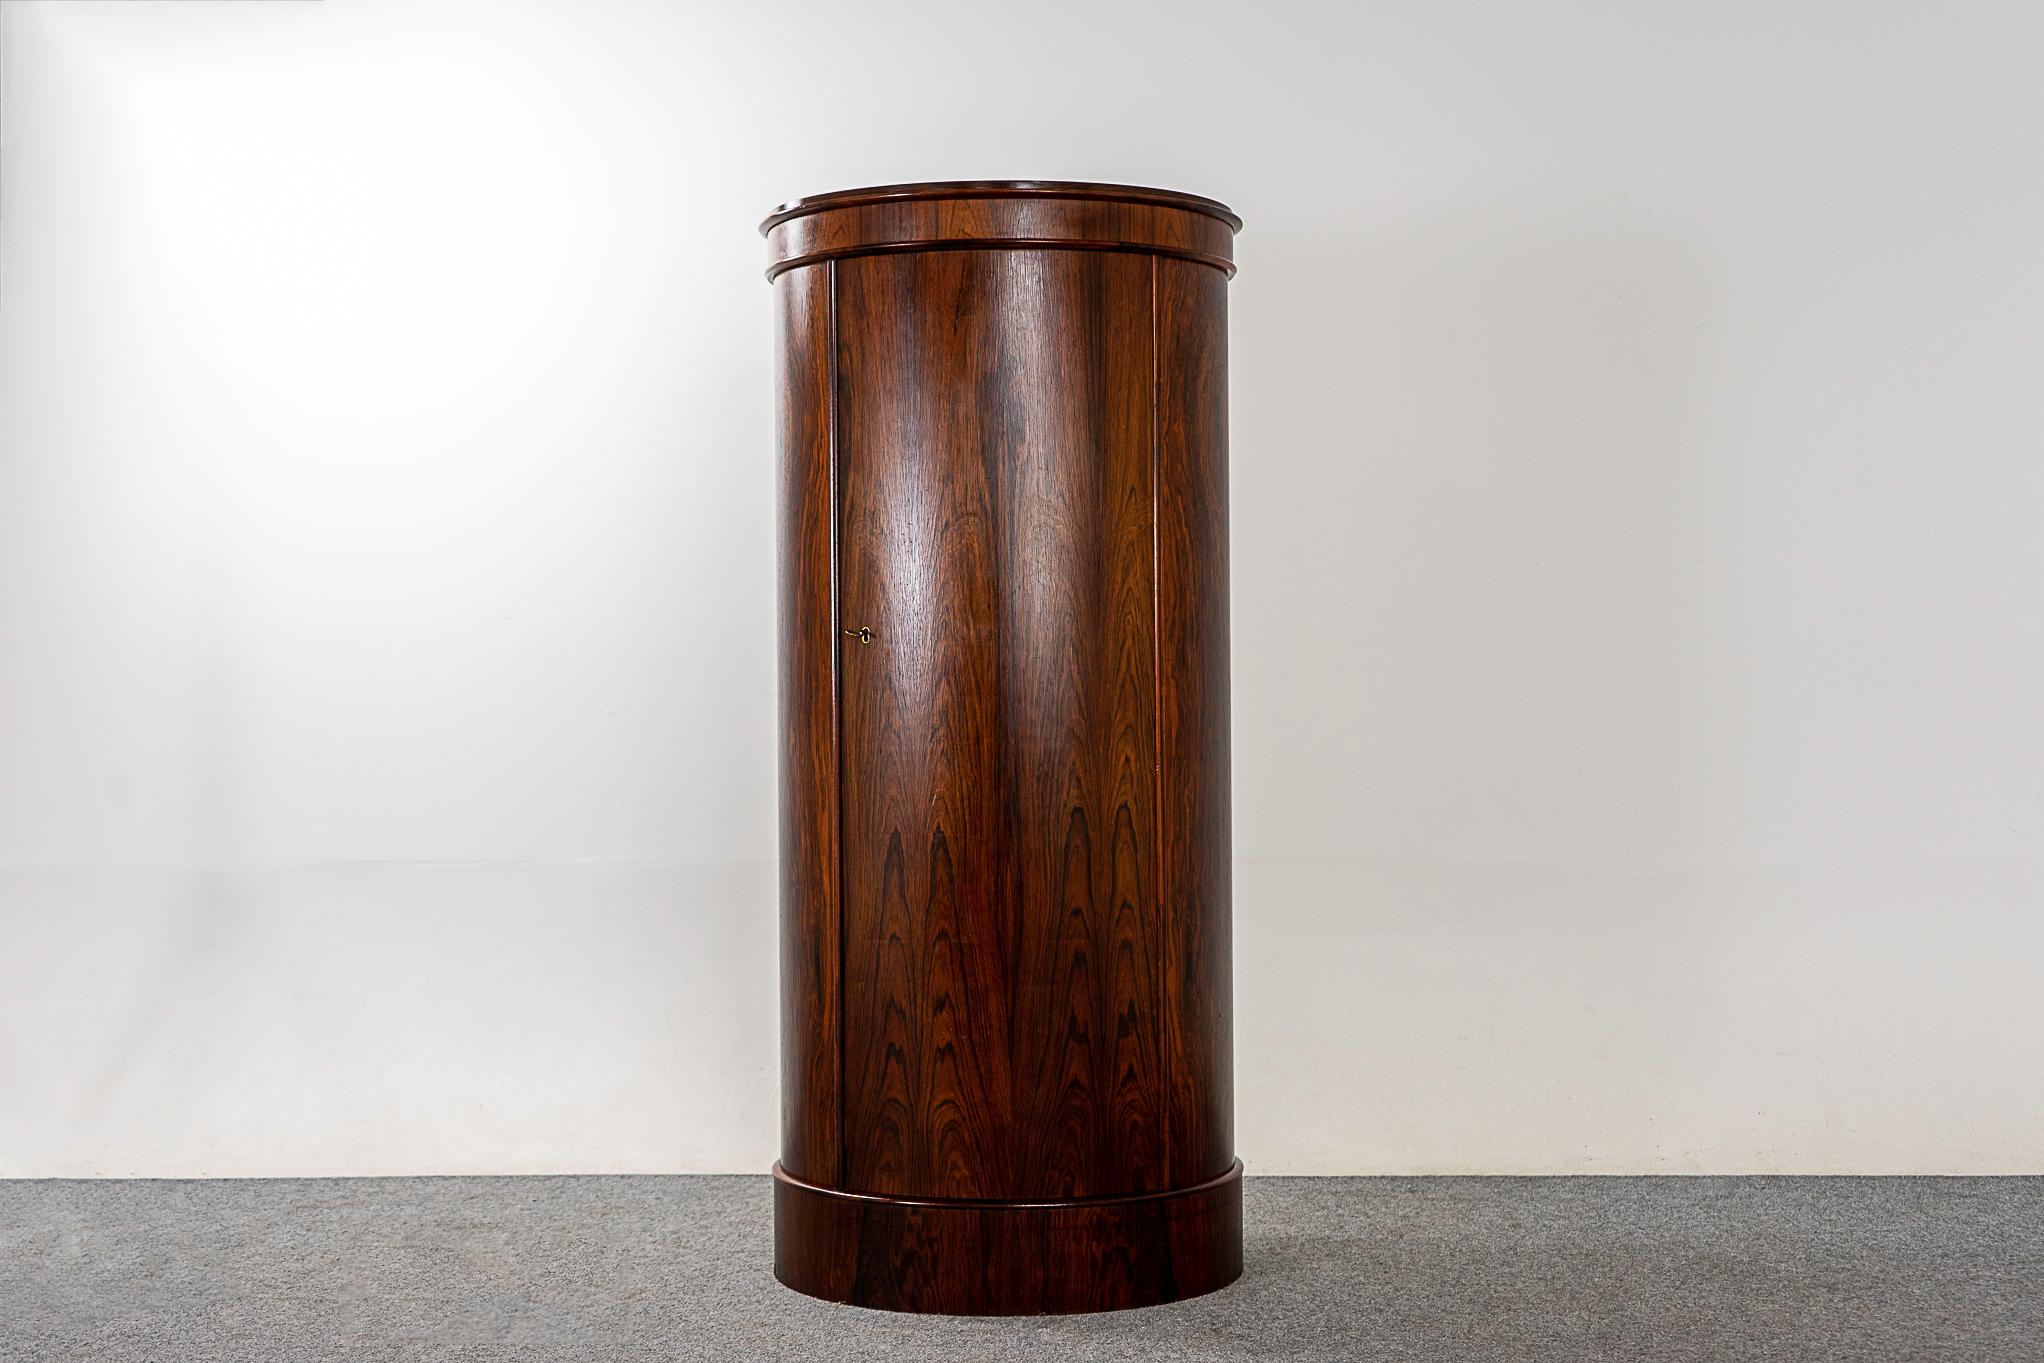 Rosewood Danish cabinet by Johannes Sorth, circa 1960s. Beautiful barrel shaped locking door opens up to reveal adjustable shelving. Date stamped May 22, 1967, makers' mark intact. Minor veneer loss along edges.